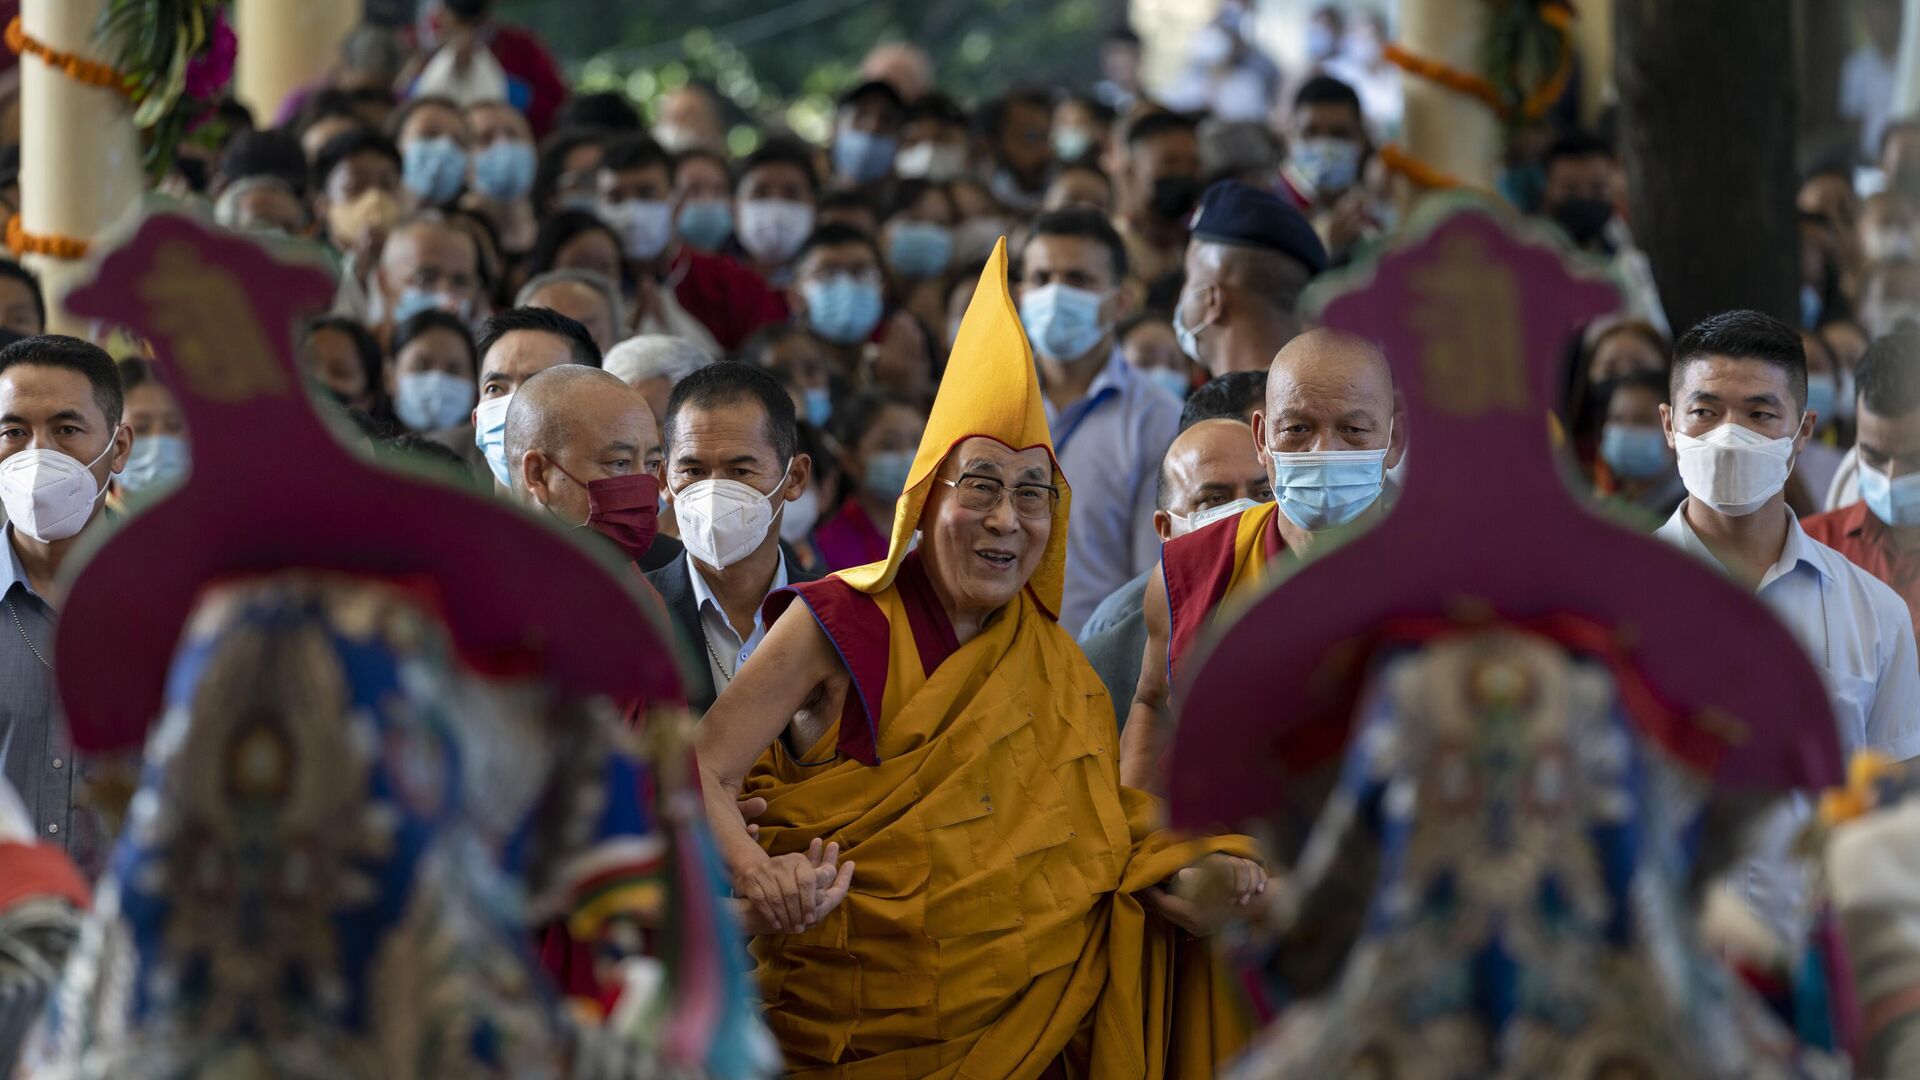 Tibetan spiritual leader the Dalai Lama, center, in a yellow ceremonial hat, watches a welcome dance performed by Tibetan artists, as he arrives at the Tsuglakhang temple in Dharmsala, India, Wednesday, Sept. 7, 2022. - Sputnik India, 1920, 17.01.2023